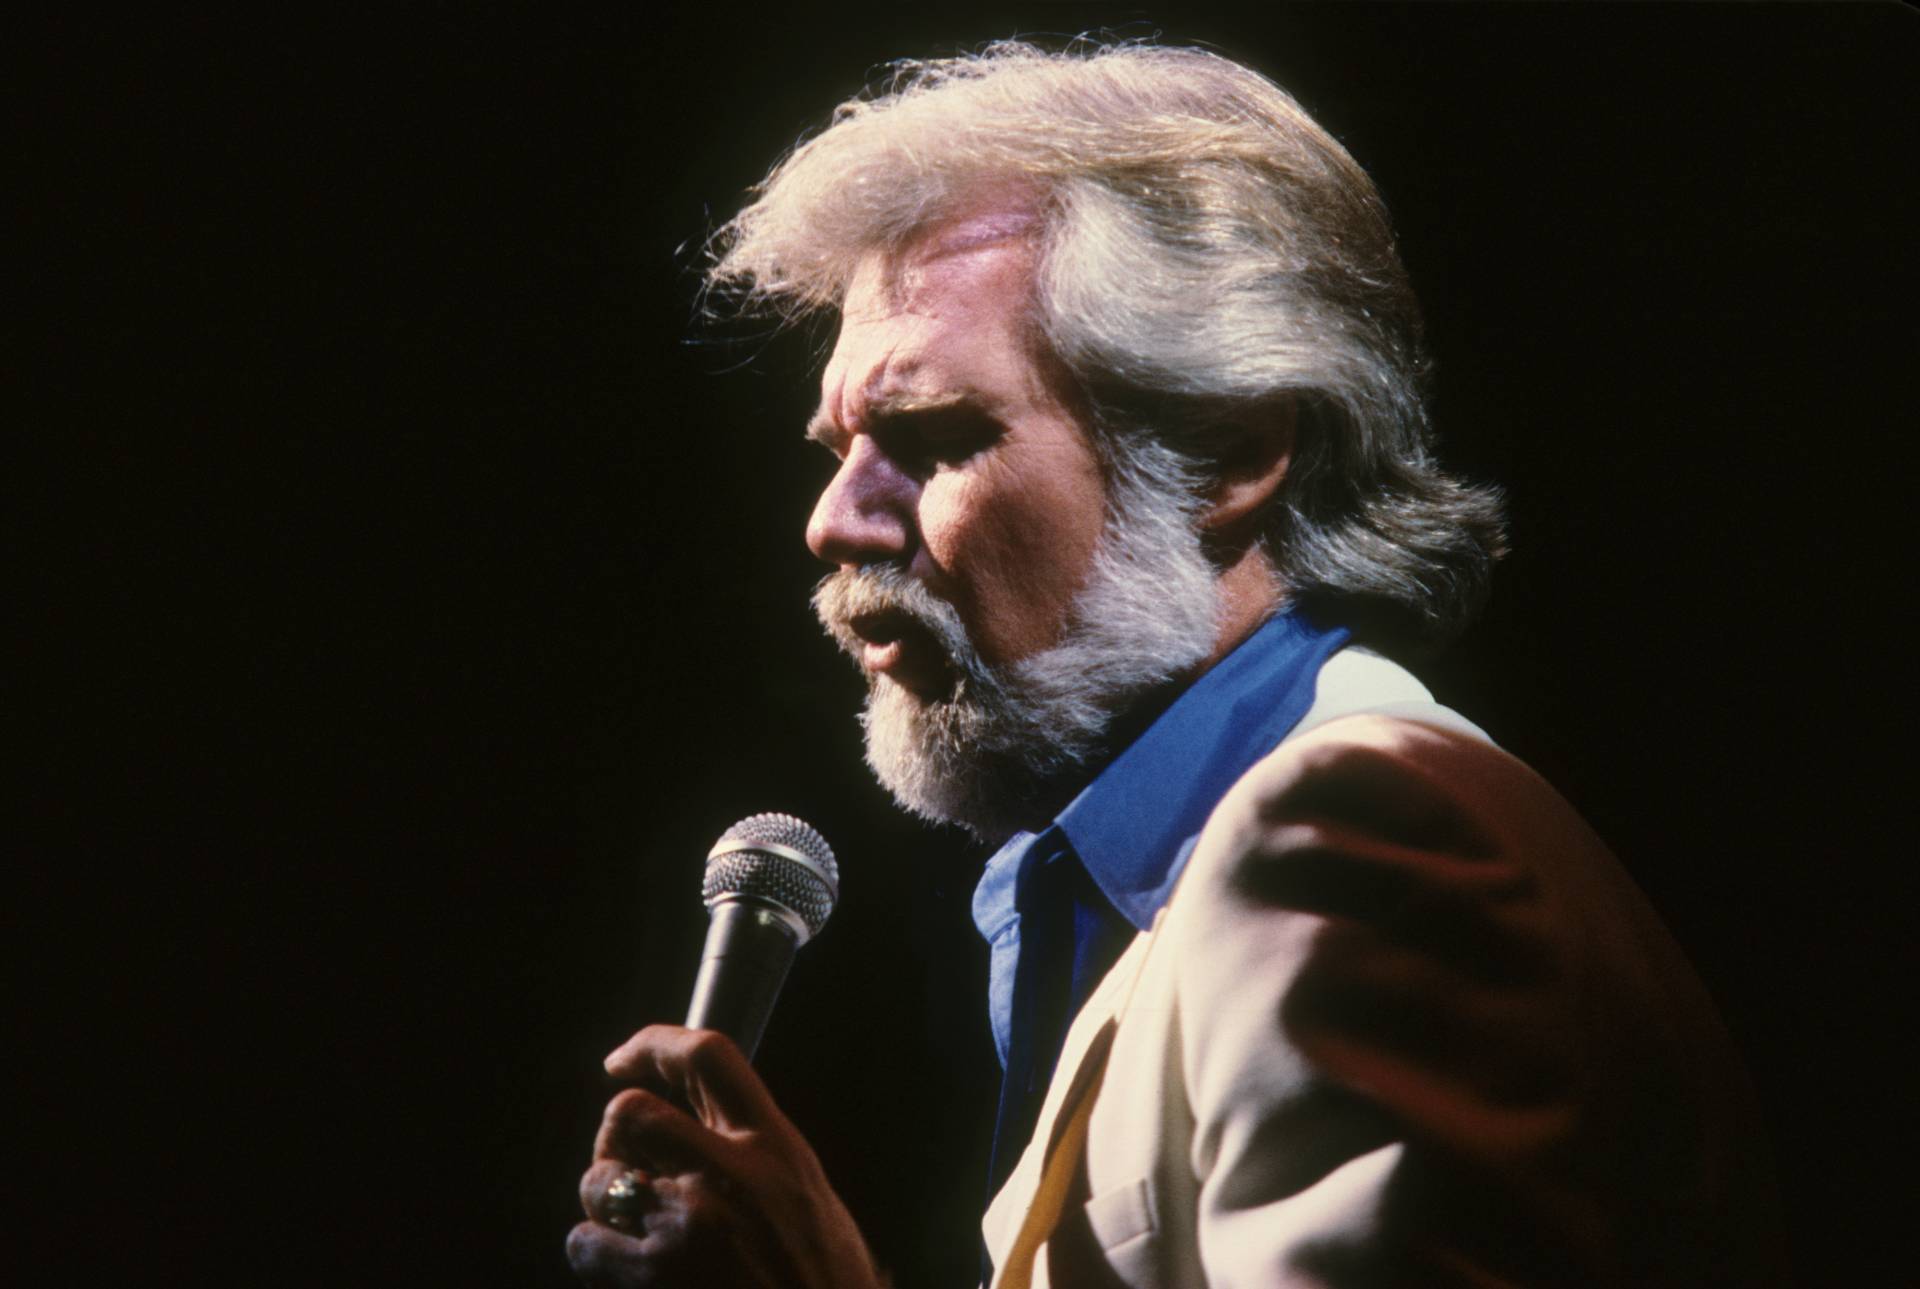 Kenny Rogers at a concert in New Jersey in 1982 | Luciano Viti/Getty Images